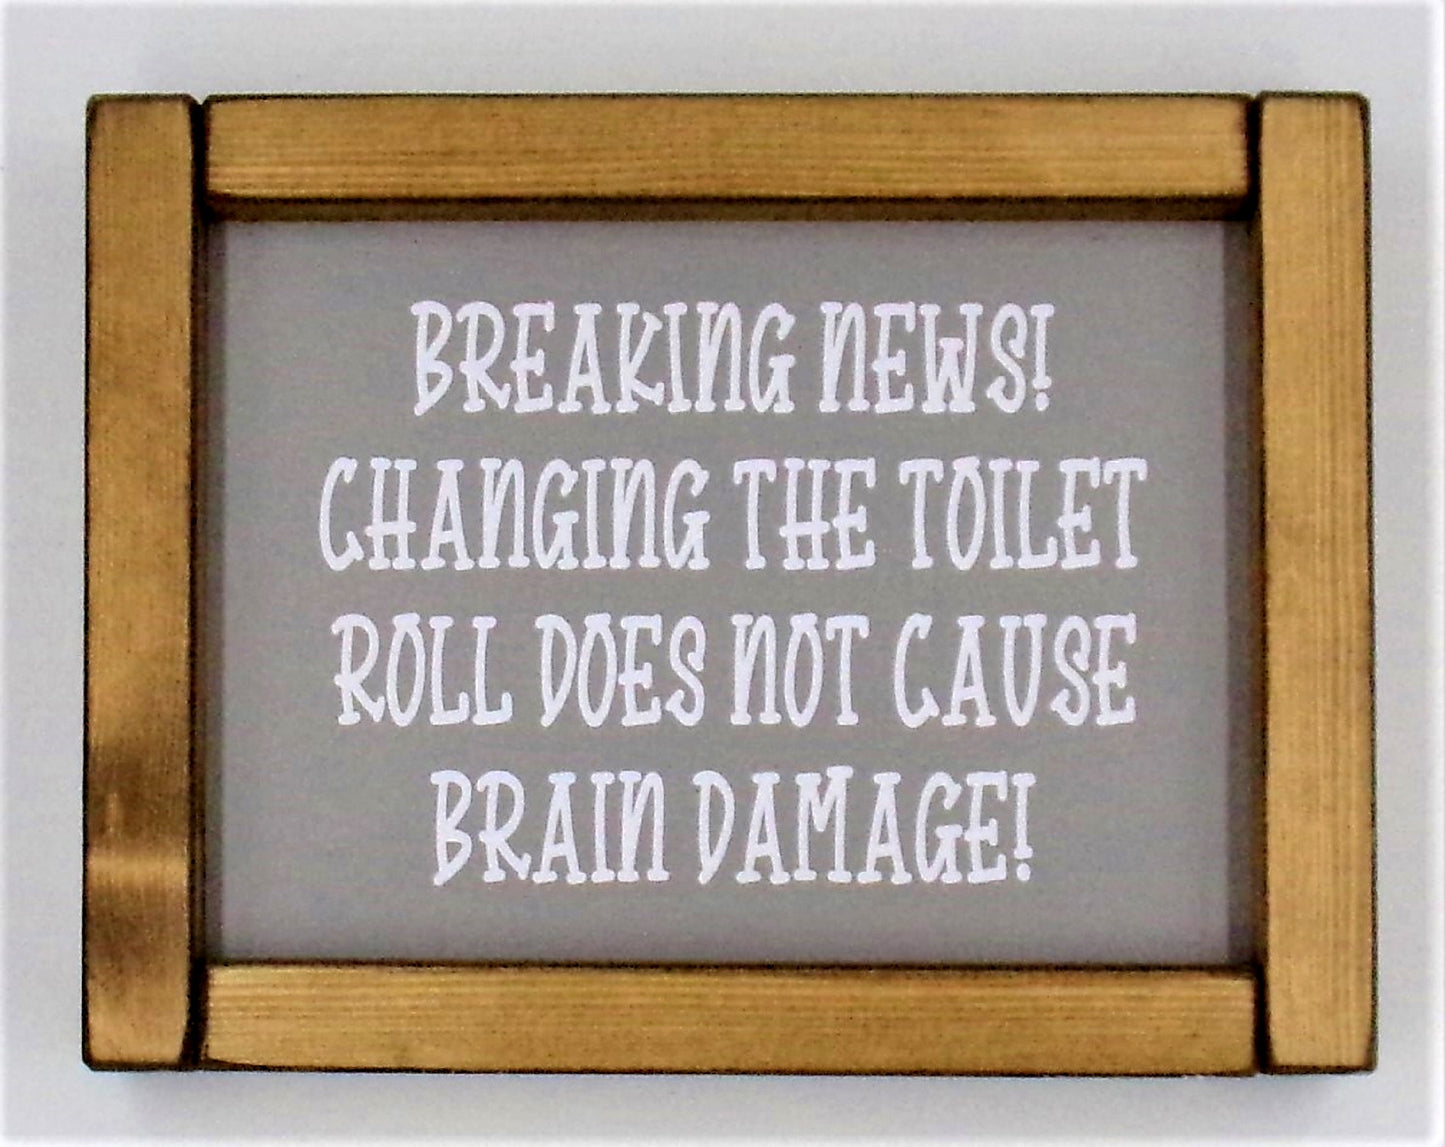 BREAKING NEWS! Changing the toilet roll….